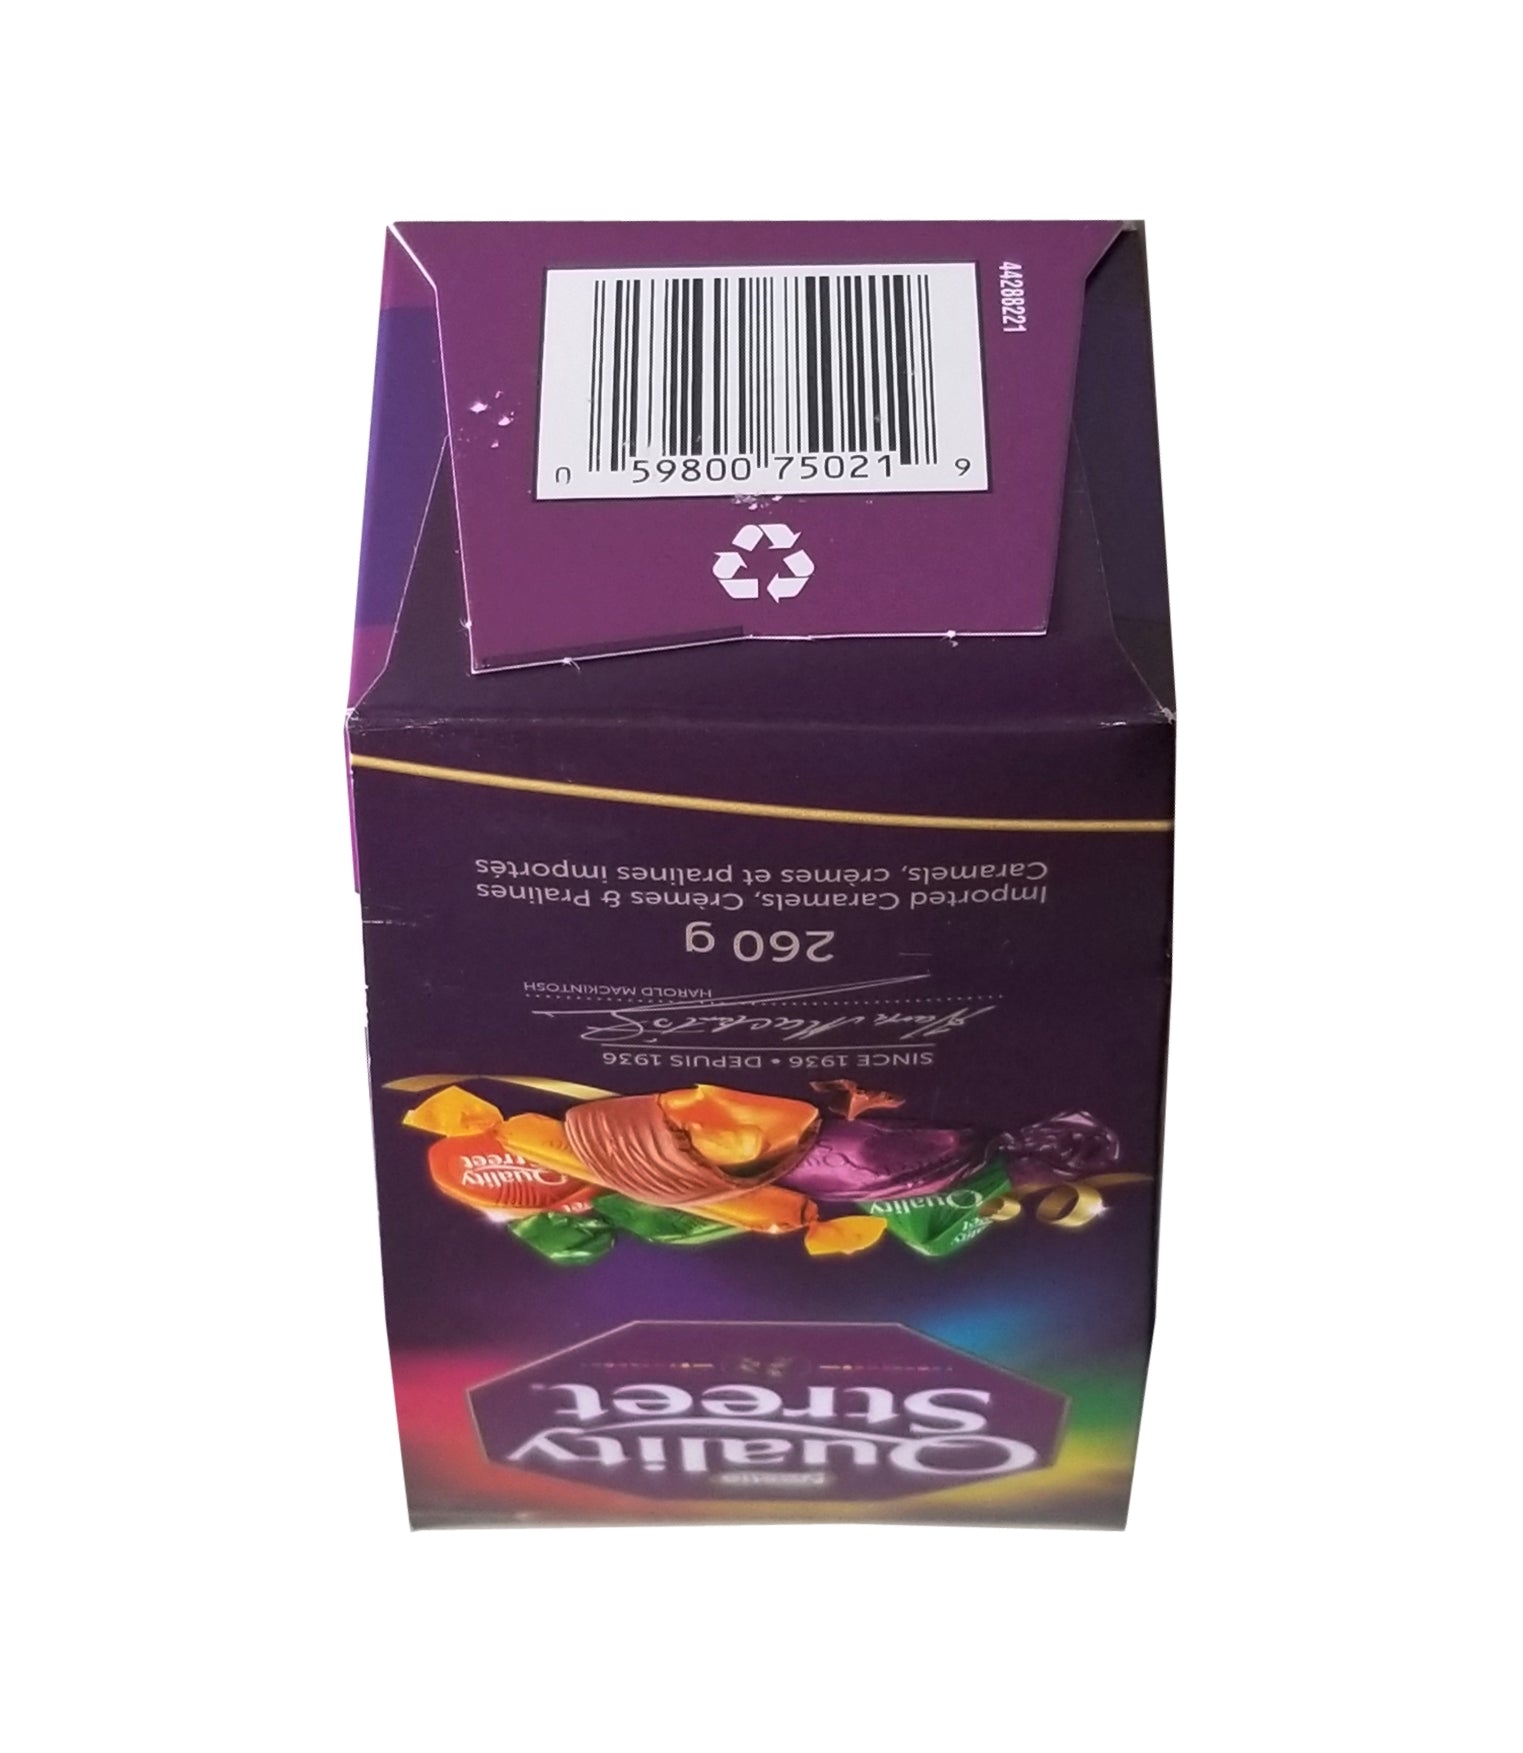 Nestle Quality Street chocolate delivered straight to your door - Buy